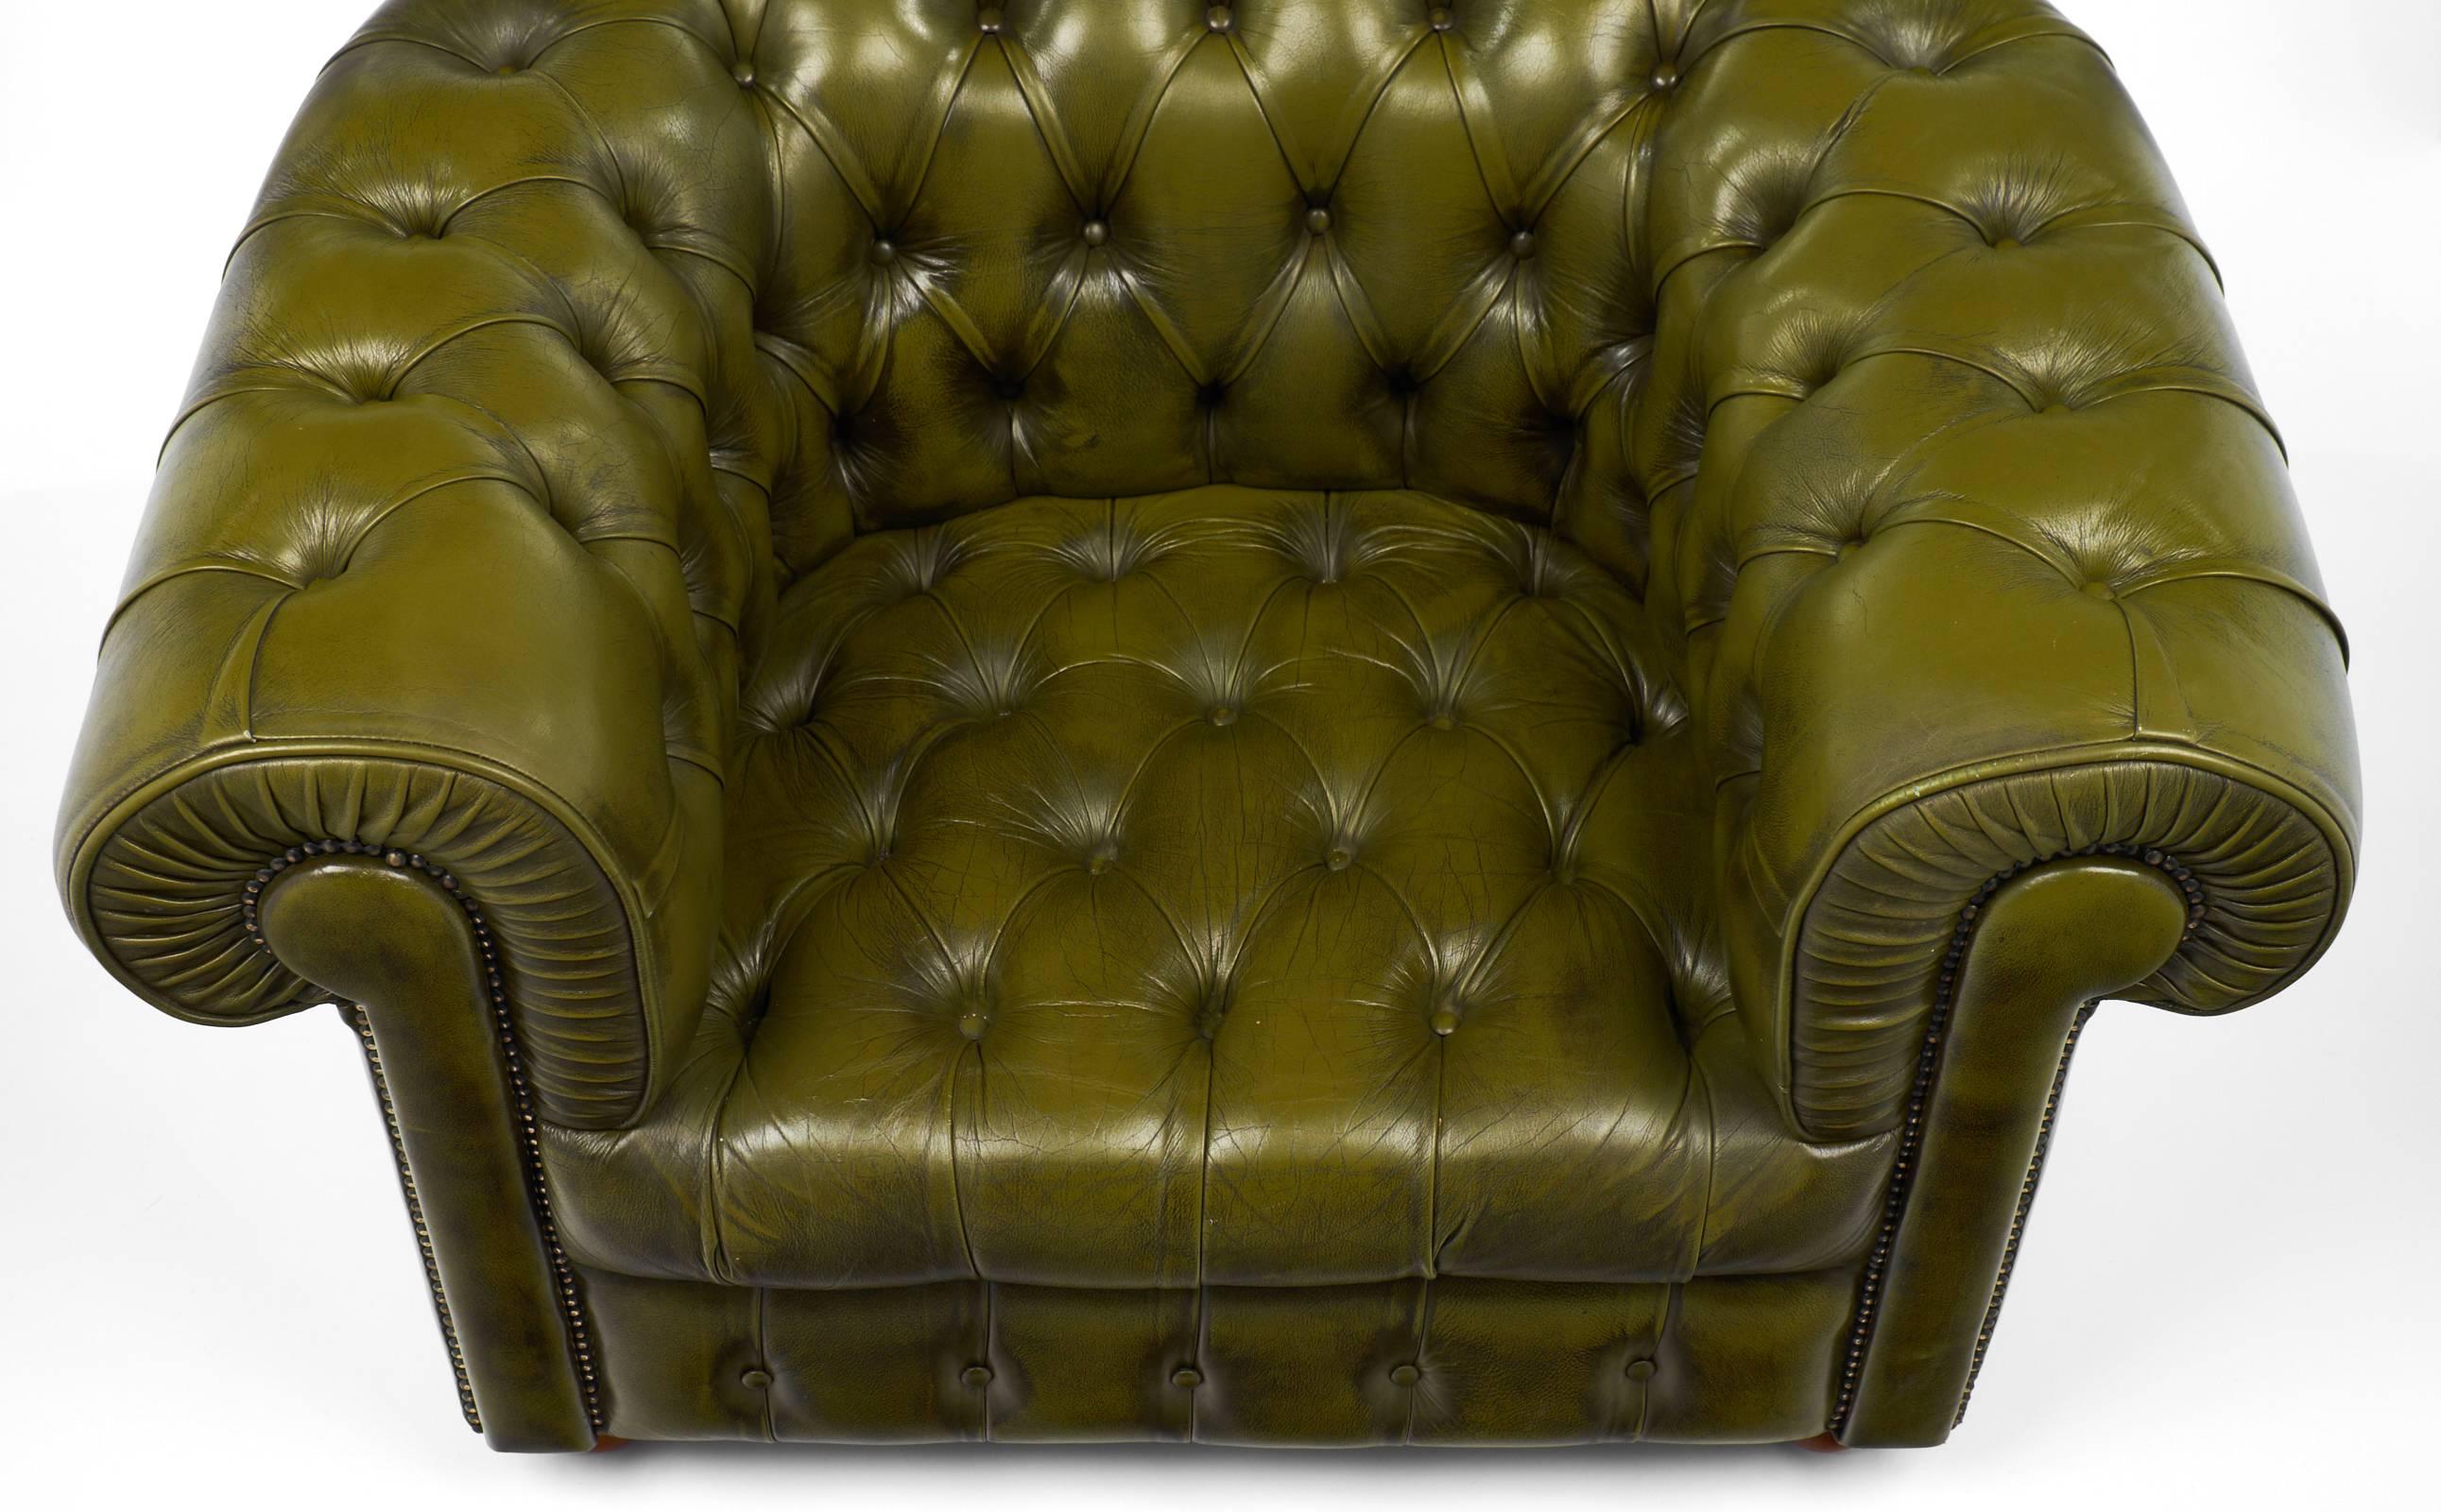 Mid-20th Century Vintage Green Leather Chesterfield Club Chair